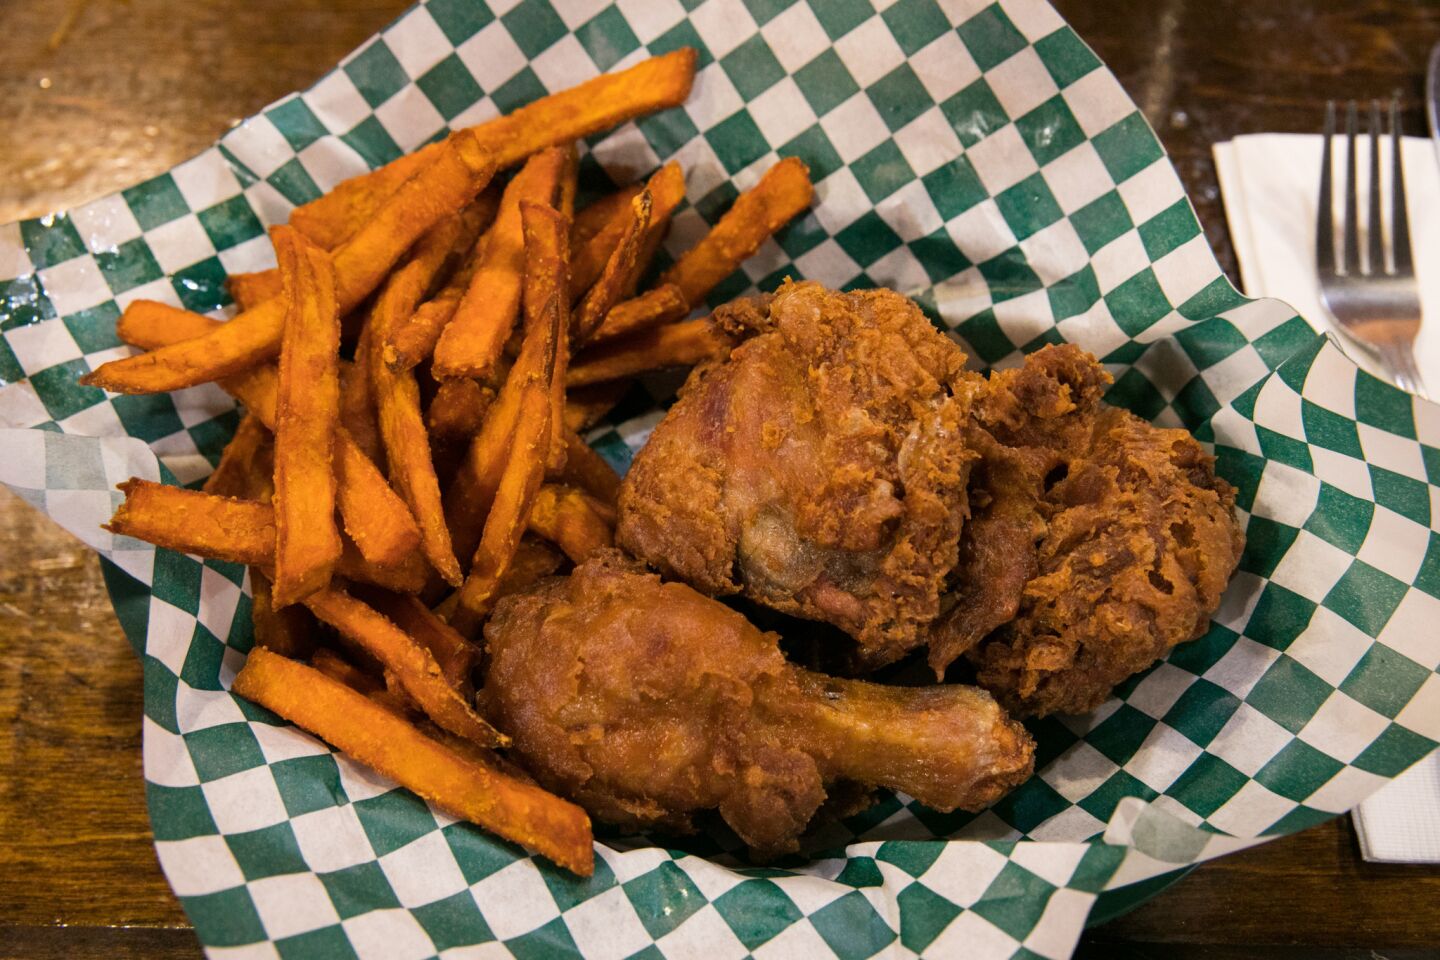 Willie Mae's Scotch House claims to have the best fried chicken in America located in the Treme neighborhood of New Orleans